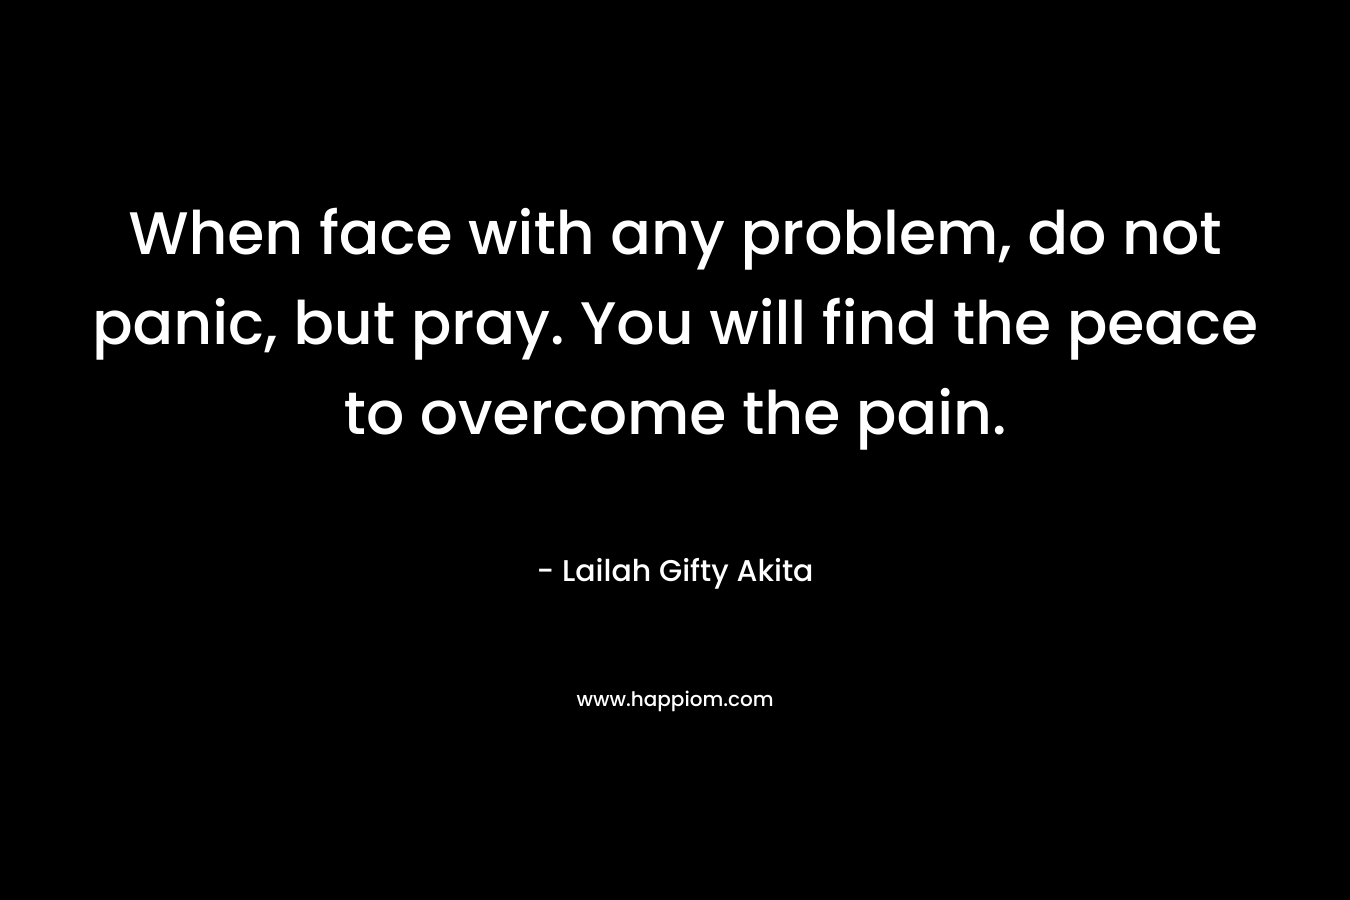 When face with any problem, do not panic, but pray. You will find the peace to overcome the pain.